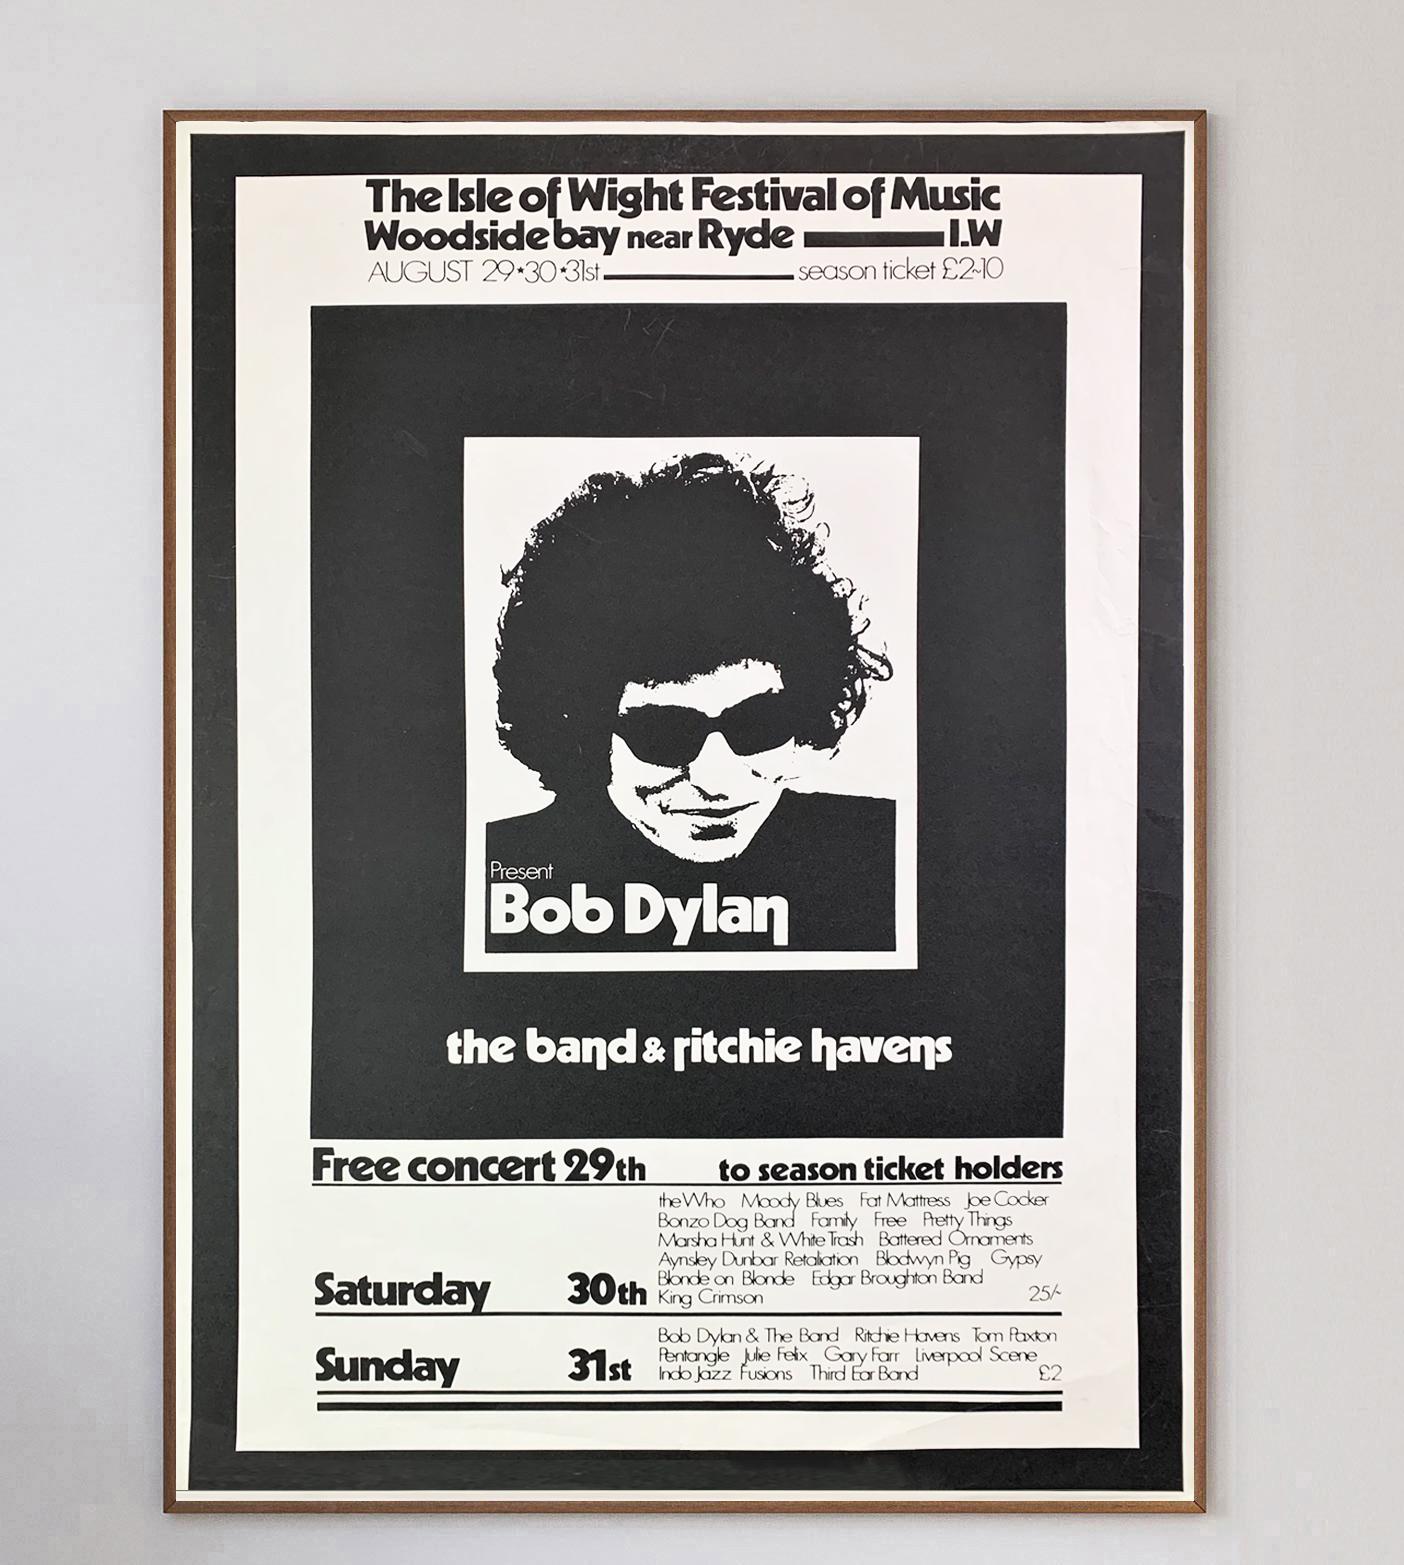 Stunning silkscreen poster in vivid deep black created to promote the 2nd ever Isle of Wight Festival & the main headliner - the one & only Bob Dylan, along with supporting act The Band and Ritchie Havens. This 1969 original poster is a wonderful